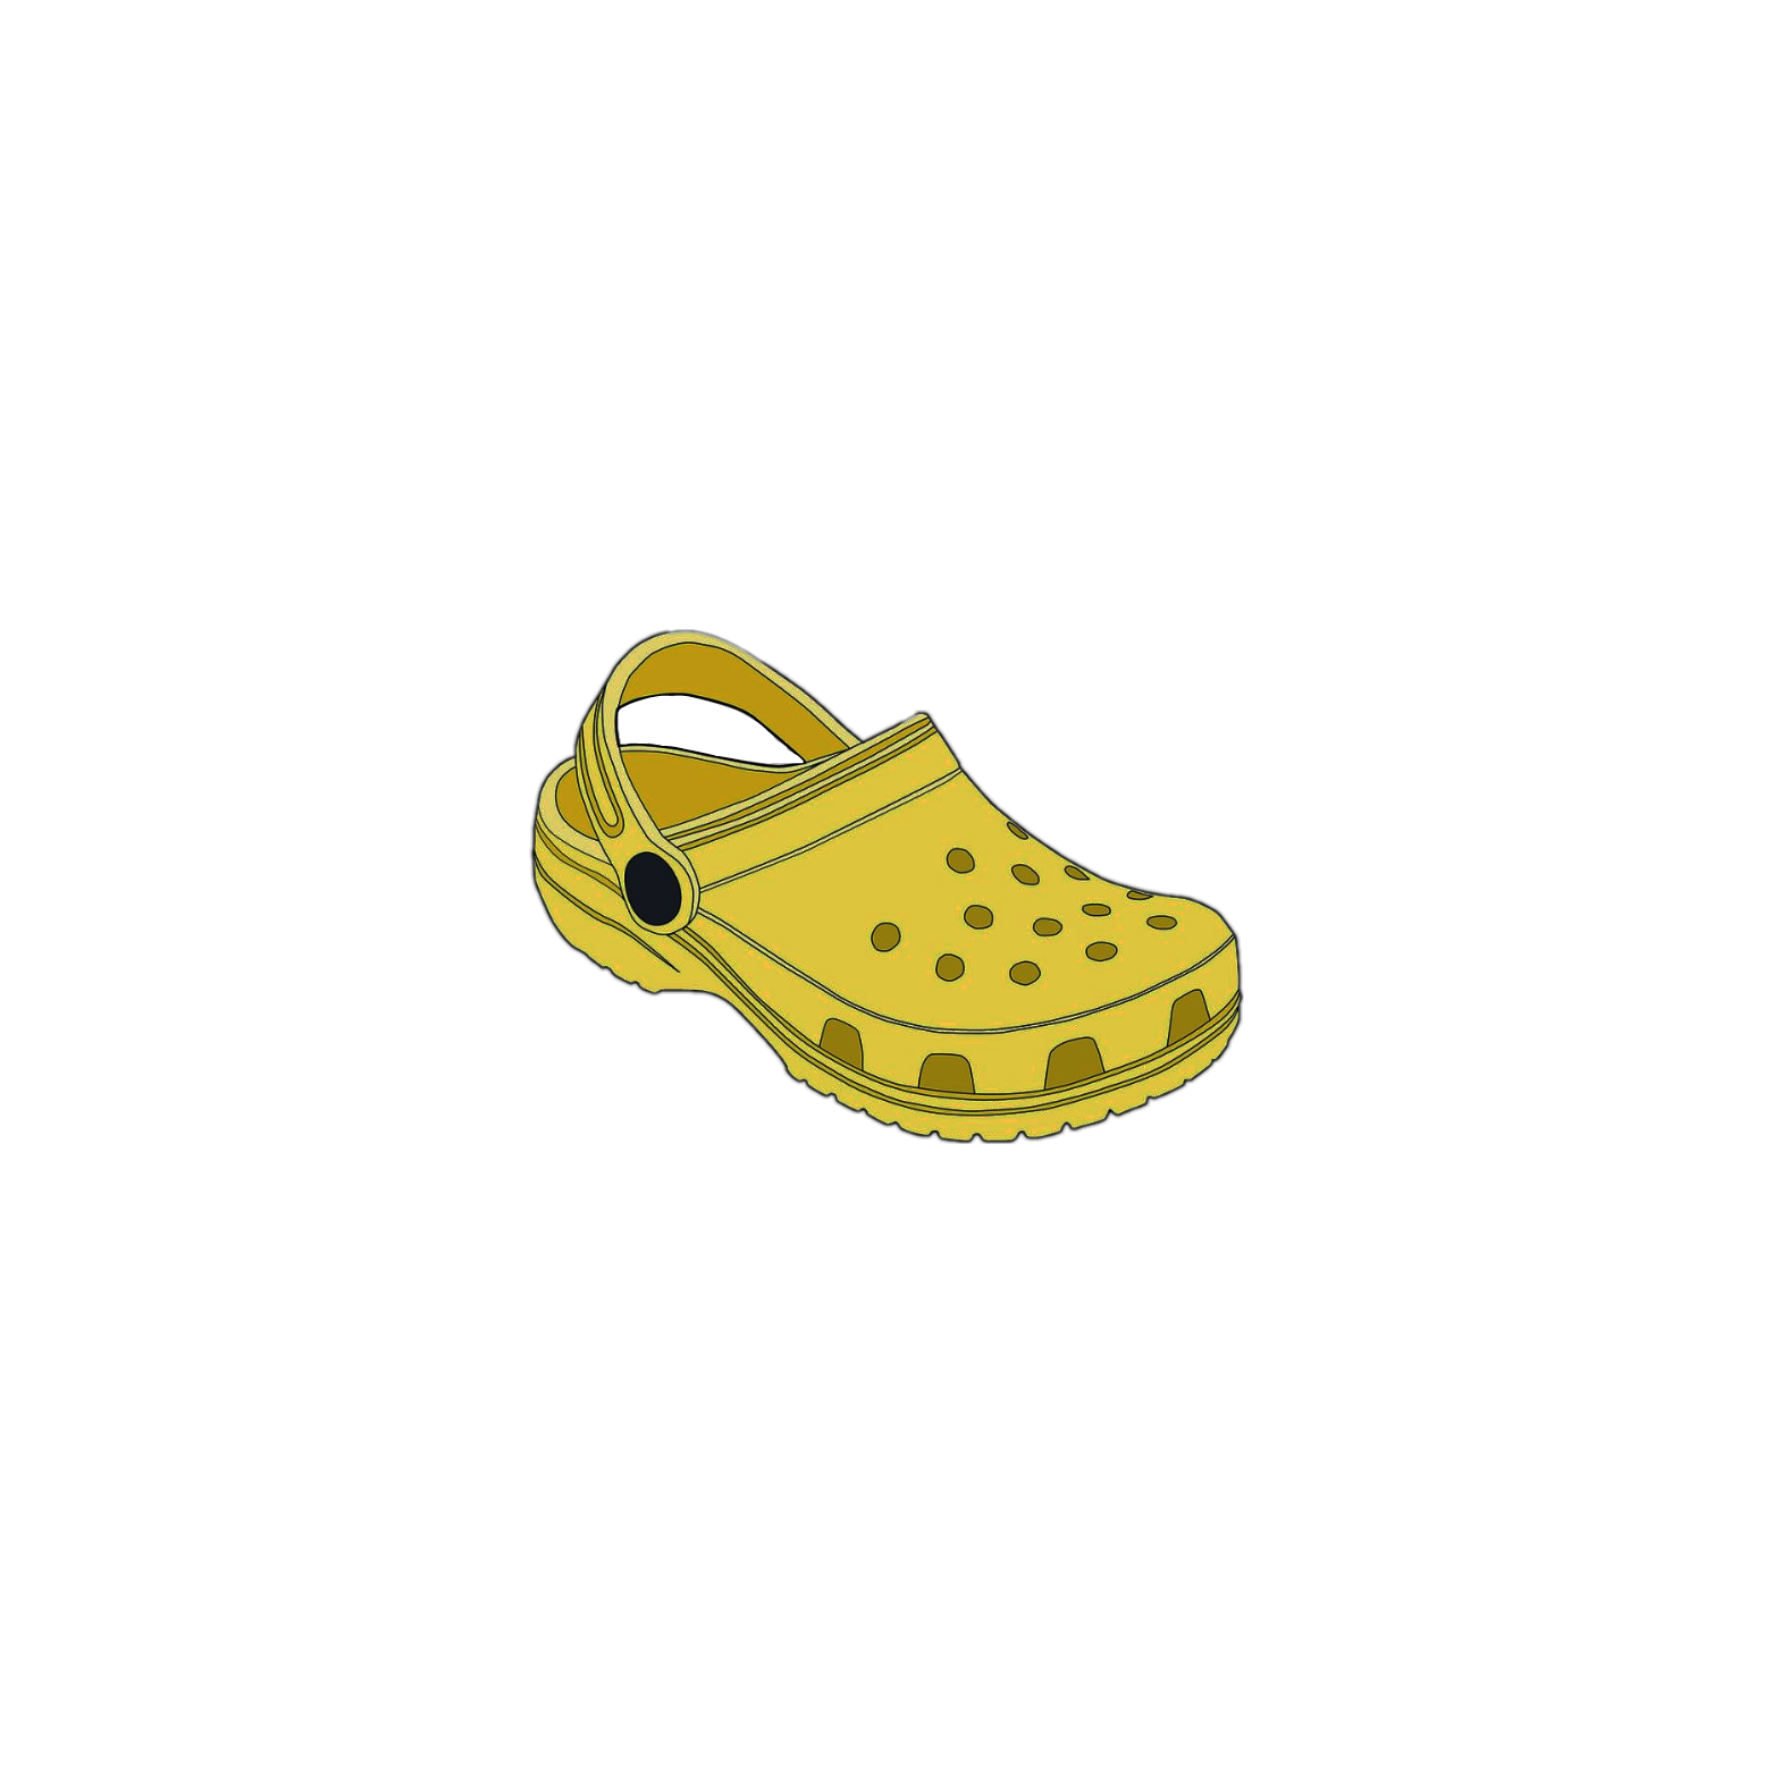 yellow crocs with stickers